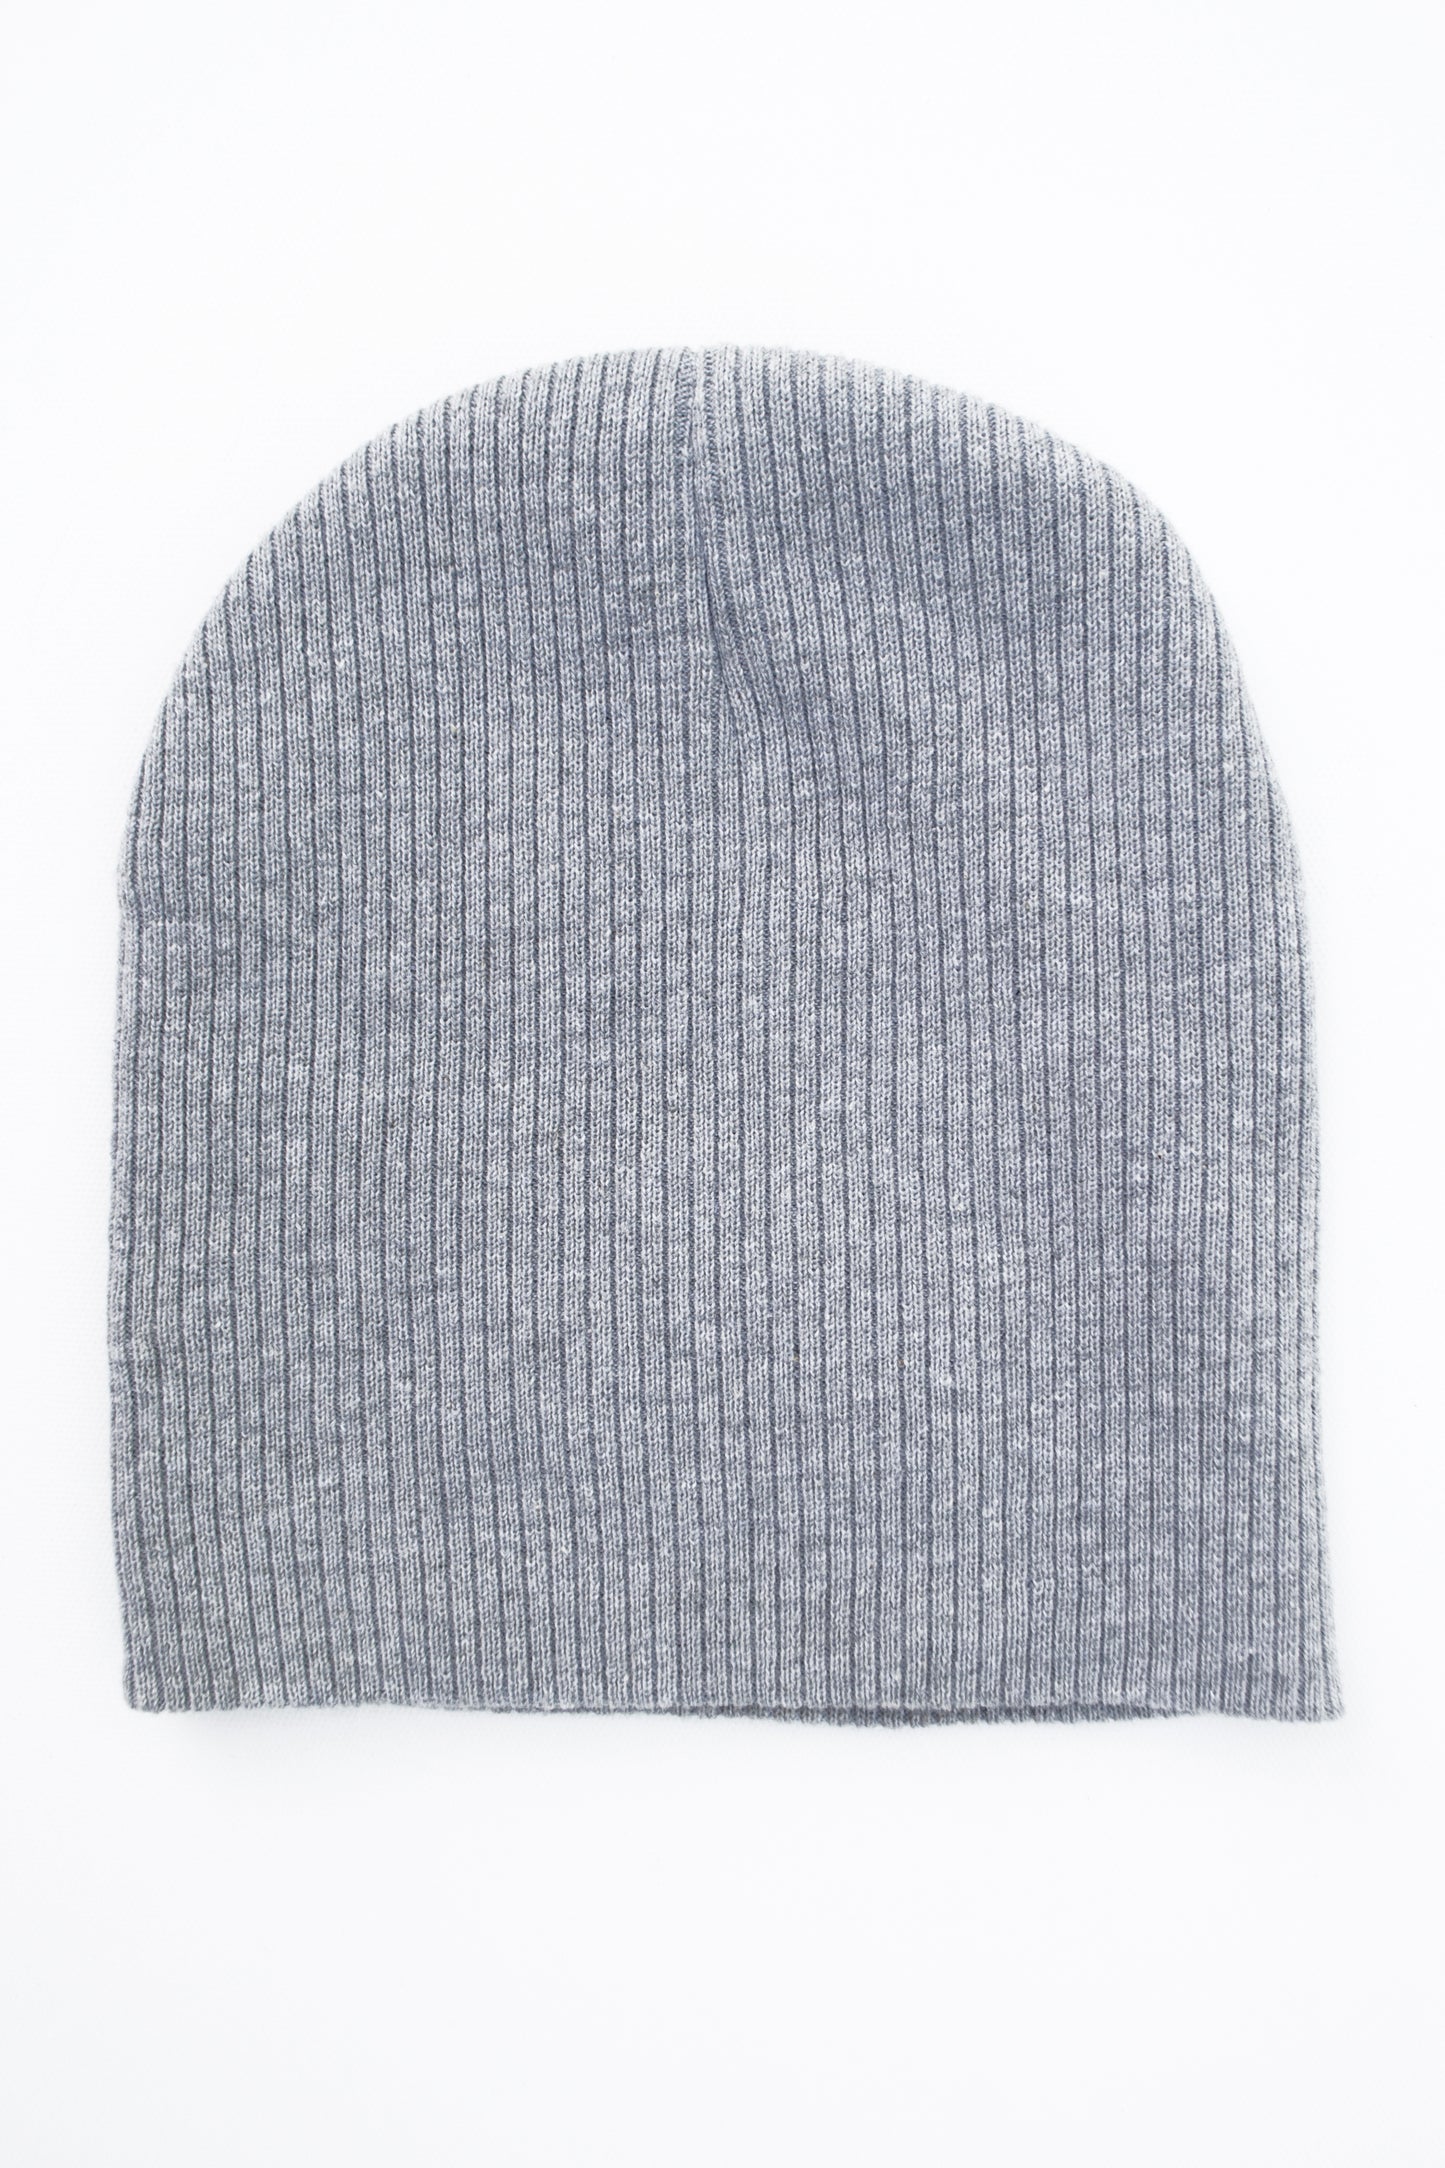 Of These Mountains Embroidered Logo Beanie (Gray)